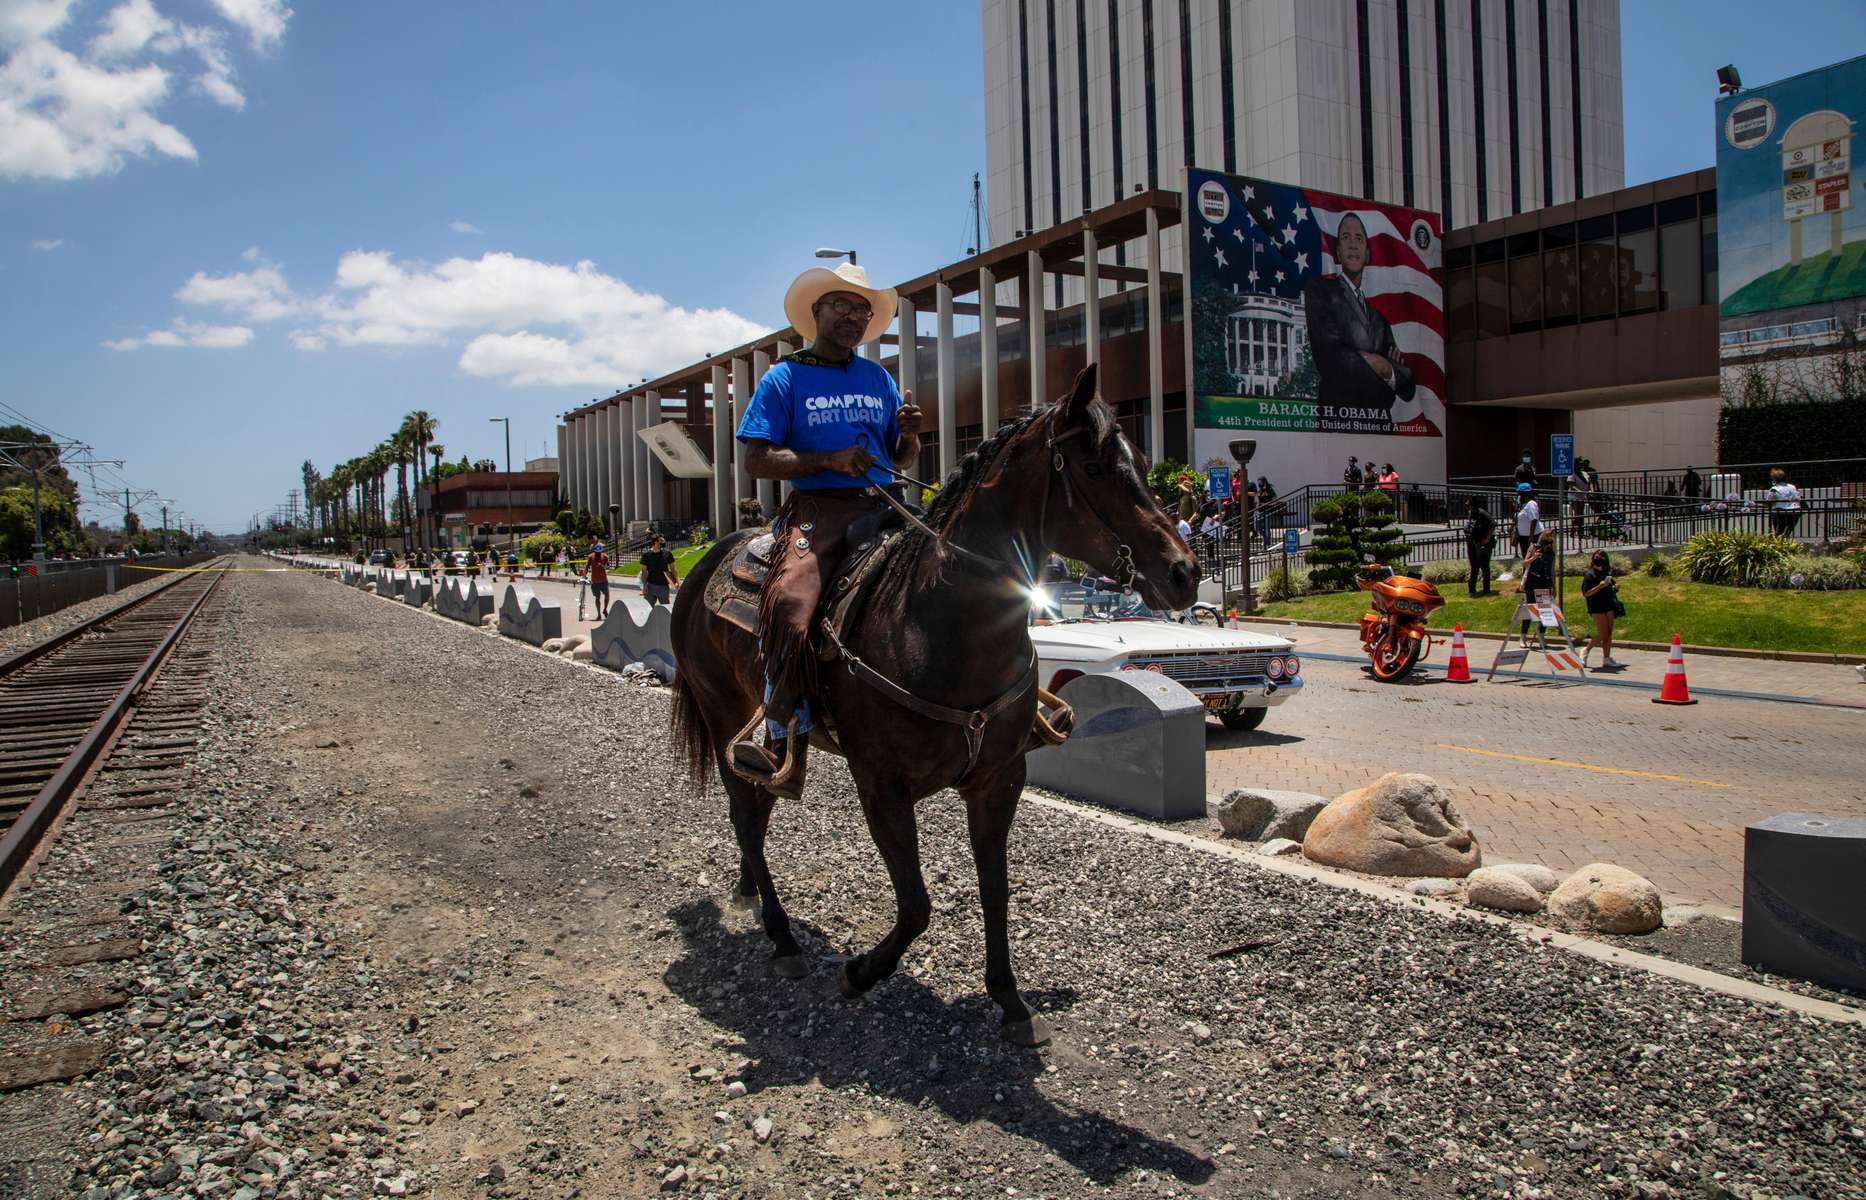 The Compton Cowboys ride along with a thousand walking protesters during a {quote}peace ride{quote} for George Floyd  on June 7, 2020, in Compton, California.This is the 13th day of protests since George Floyd died in Minneapolis police custody on May 25. 